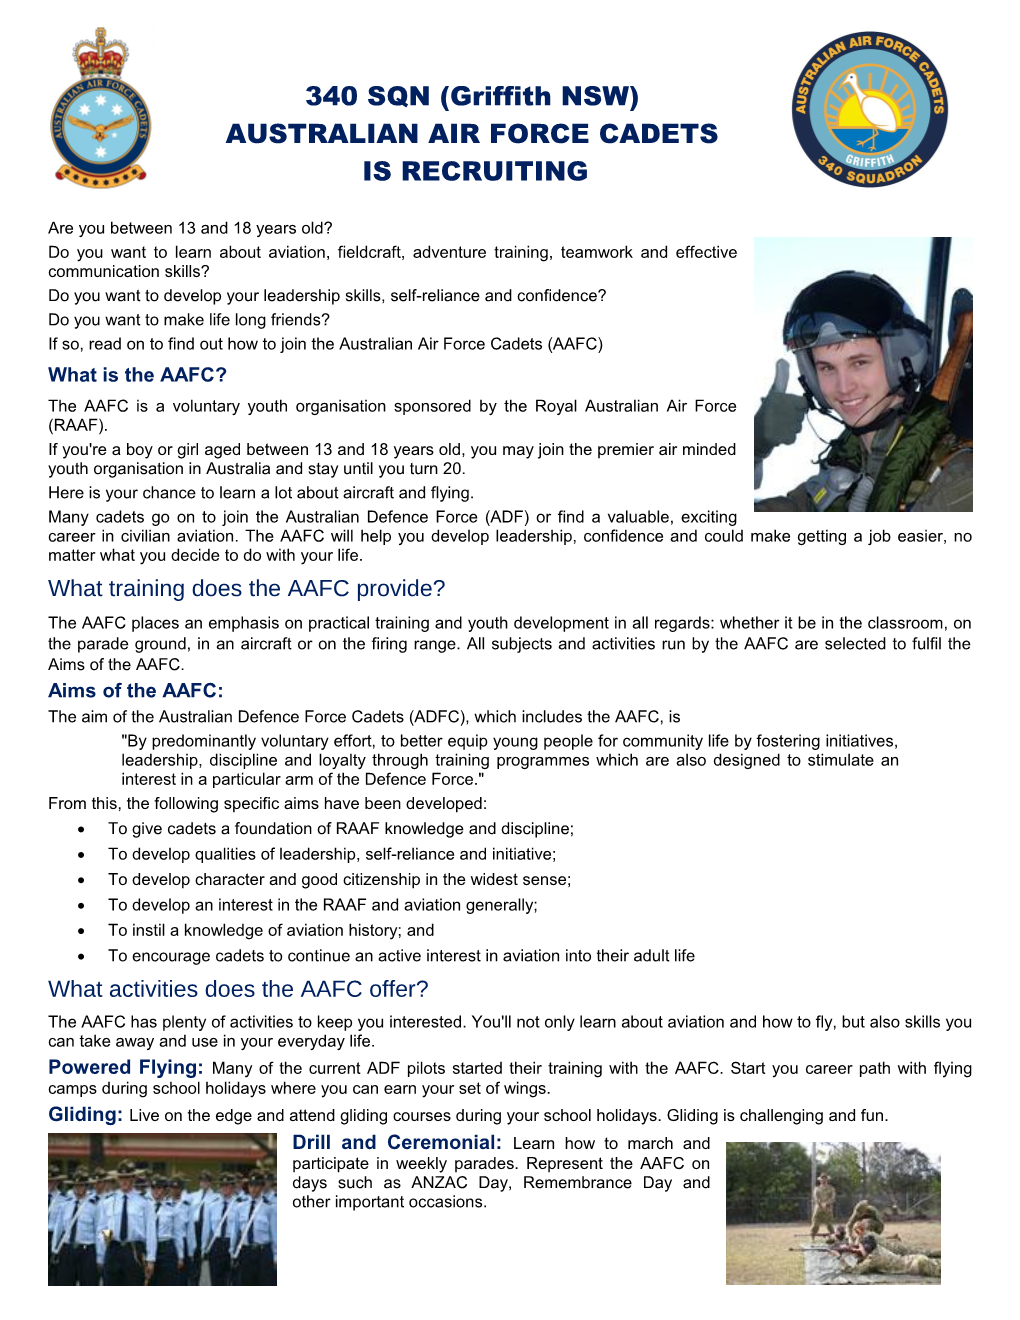 340 SQN Recruiting Poster